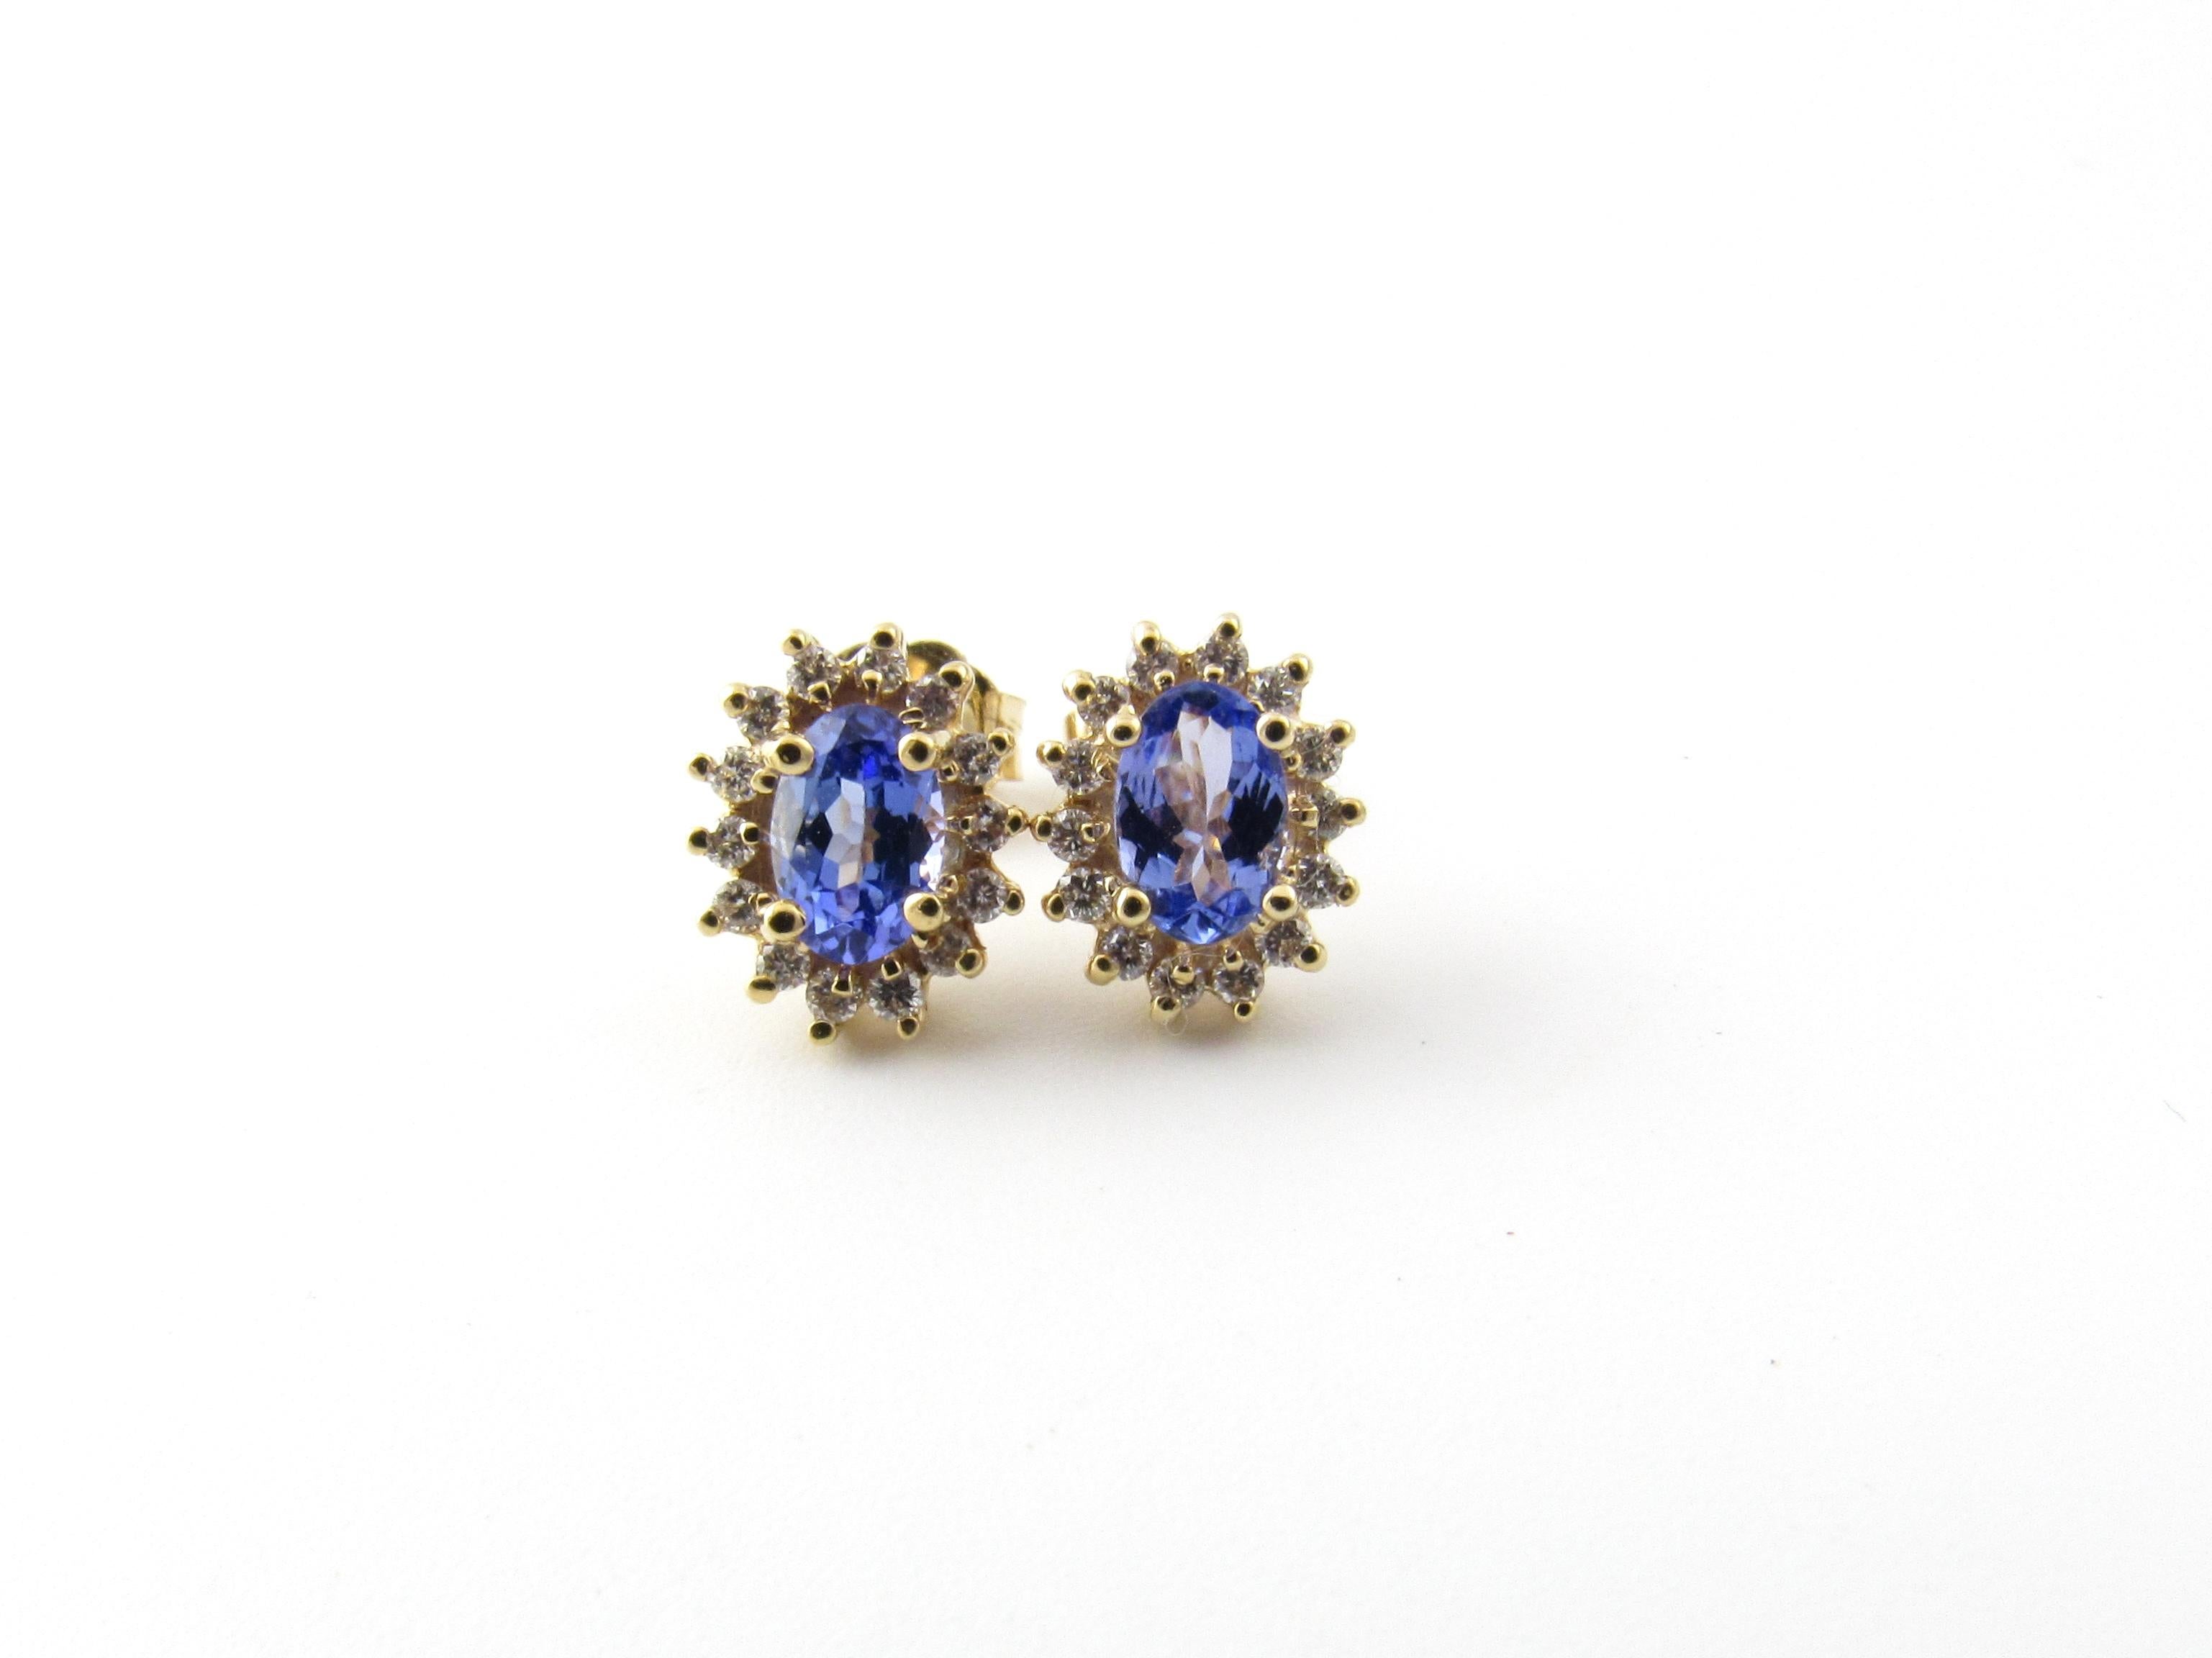 Vintage 14 Karat Yellow Gold Tanzanite and Diamond Earrings

These sparkling earrings each feature one oval tanzanite (6 mm x 4 mm) surrounded with 14 round brilliant cut diamonds set in classic 14K yellow gold. Push back closures.

Approximate